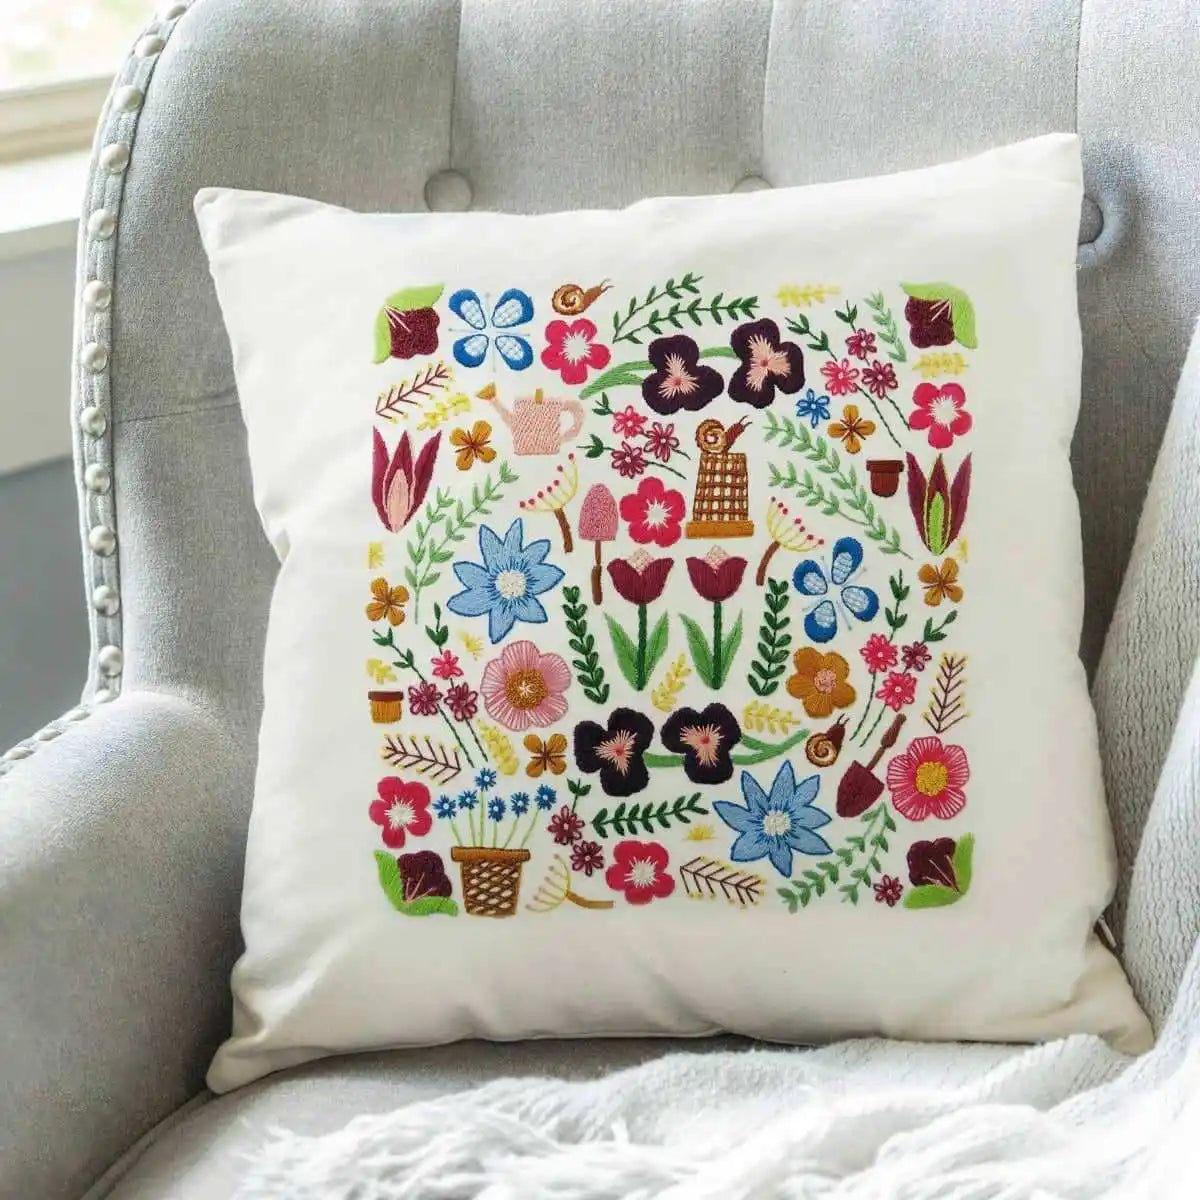 Happy New Year - start the year with colorful Folk Art inspired  stitching - Stitchdoodles